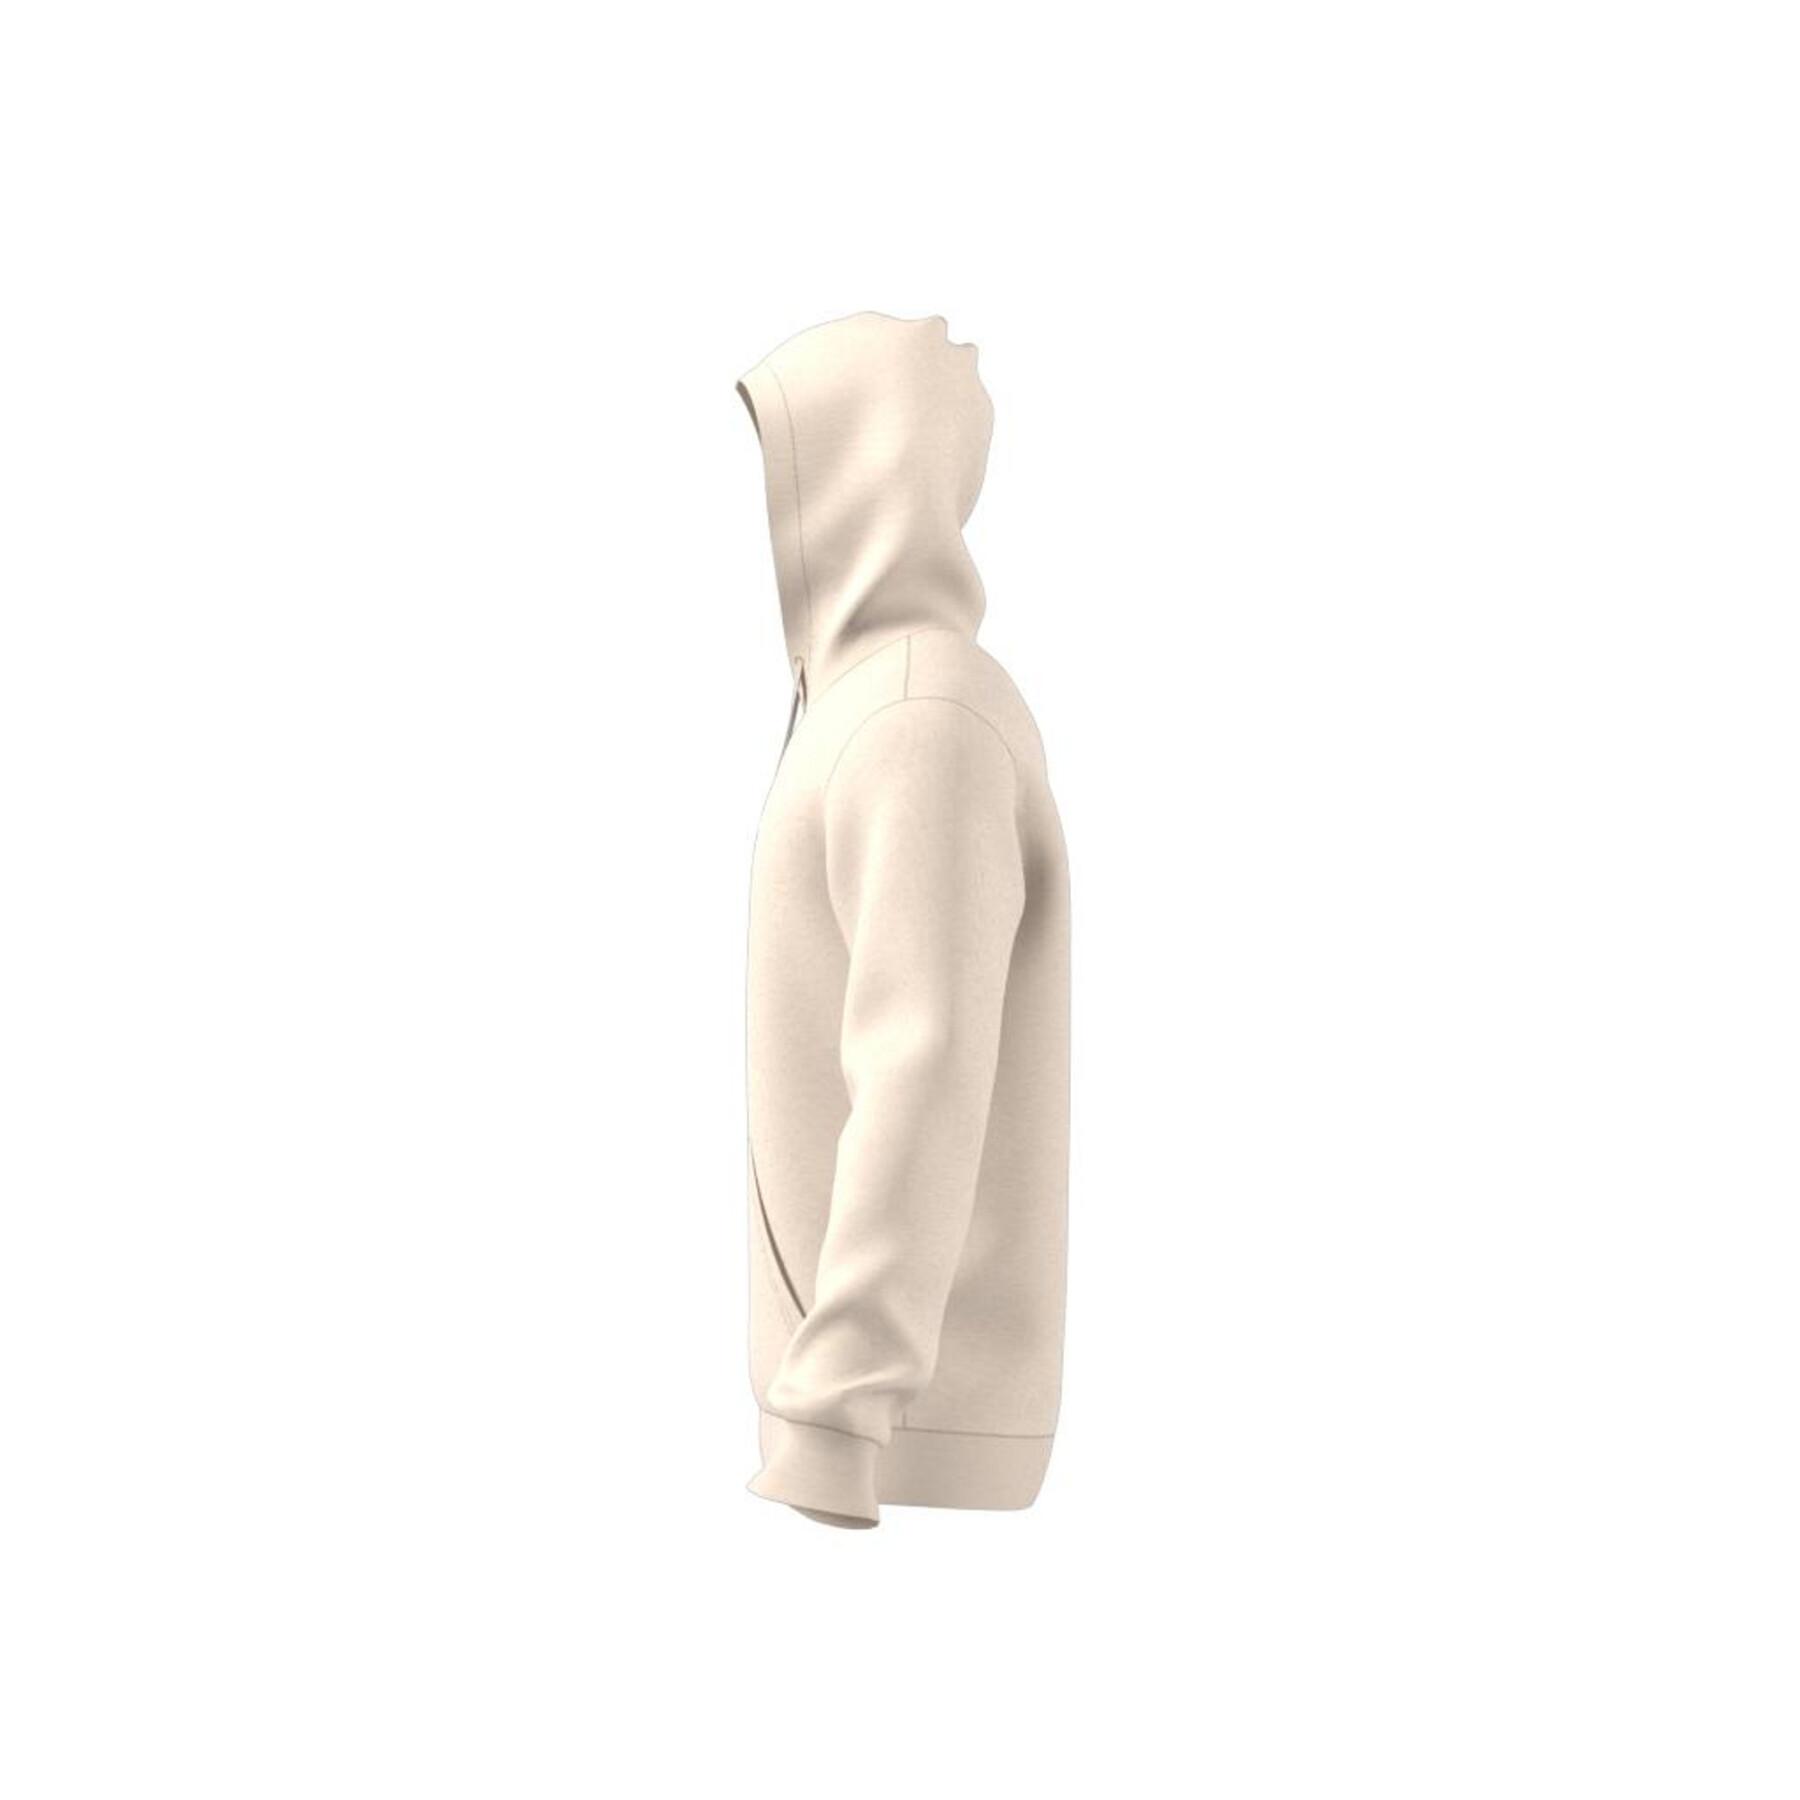 Hooded sweatshirt adidas Connected Through Sport Graphic